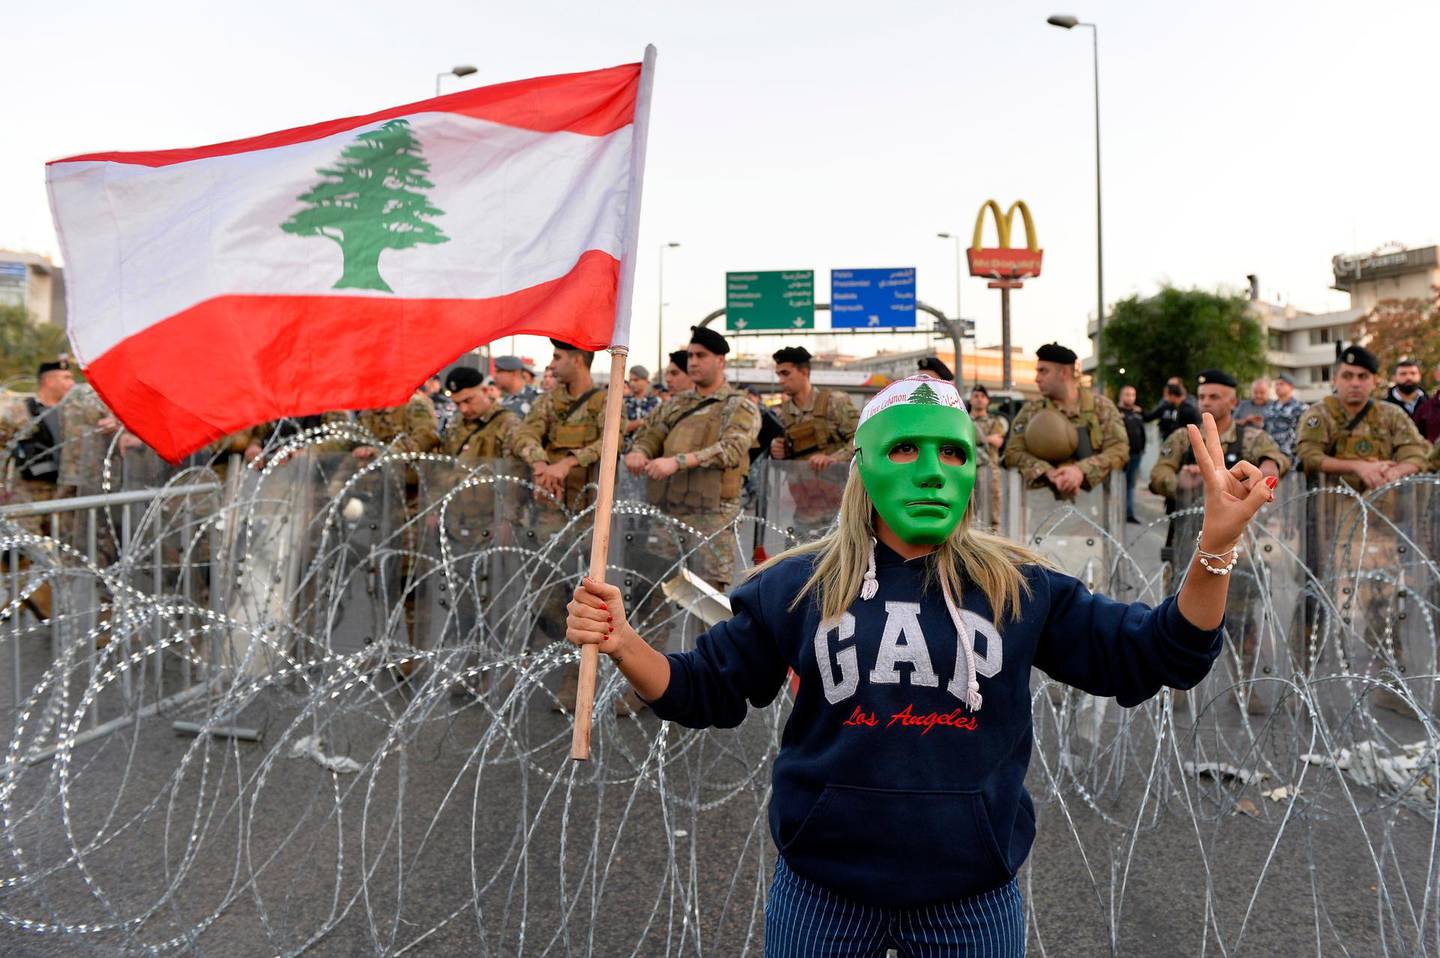 epa08027258 A protester wears a mask and holds a national flag as other protesters block the highway leading to the Presidential palace during a protest to demand the formation of a new government in Baabda, east Beirut, Lebanon, 26 November 2019. Protests in Lebanon are continuing since first erupted on 17 October, as protesters aim to apply pressure on the country's political leaders over what they view as a lack of progress following the prime minister's resignation on 29 October.  EPA/WAEL HAMZEH